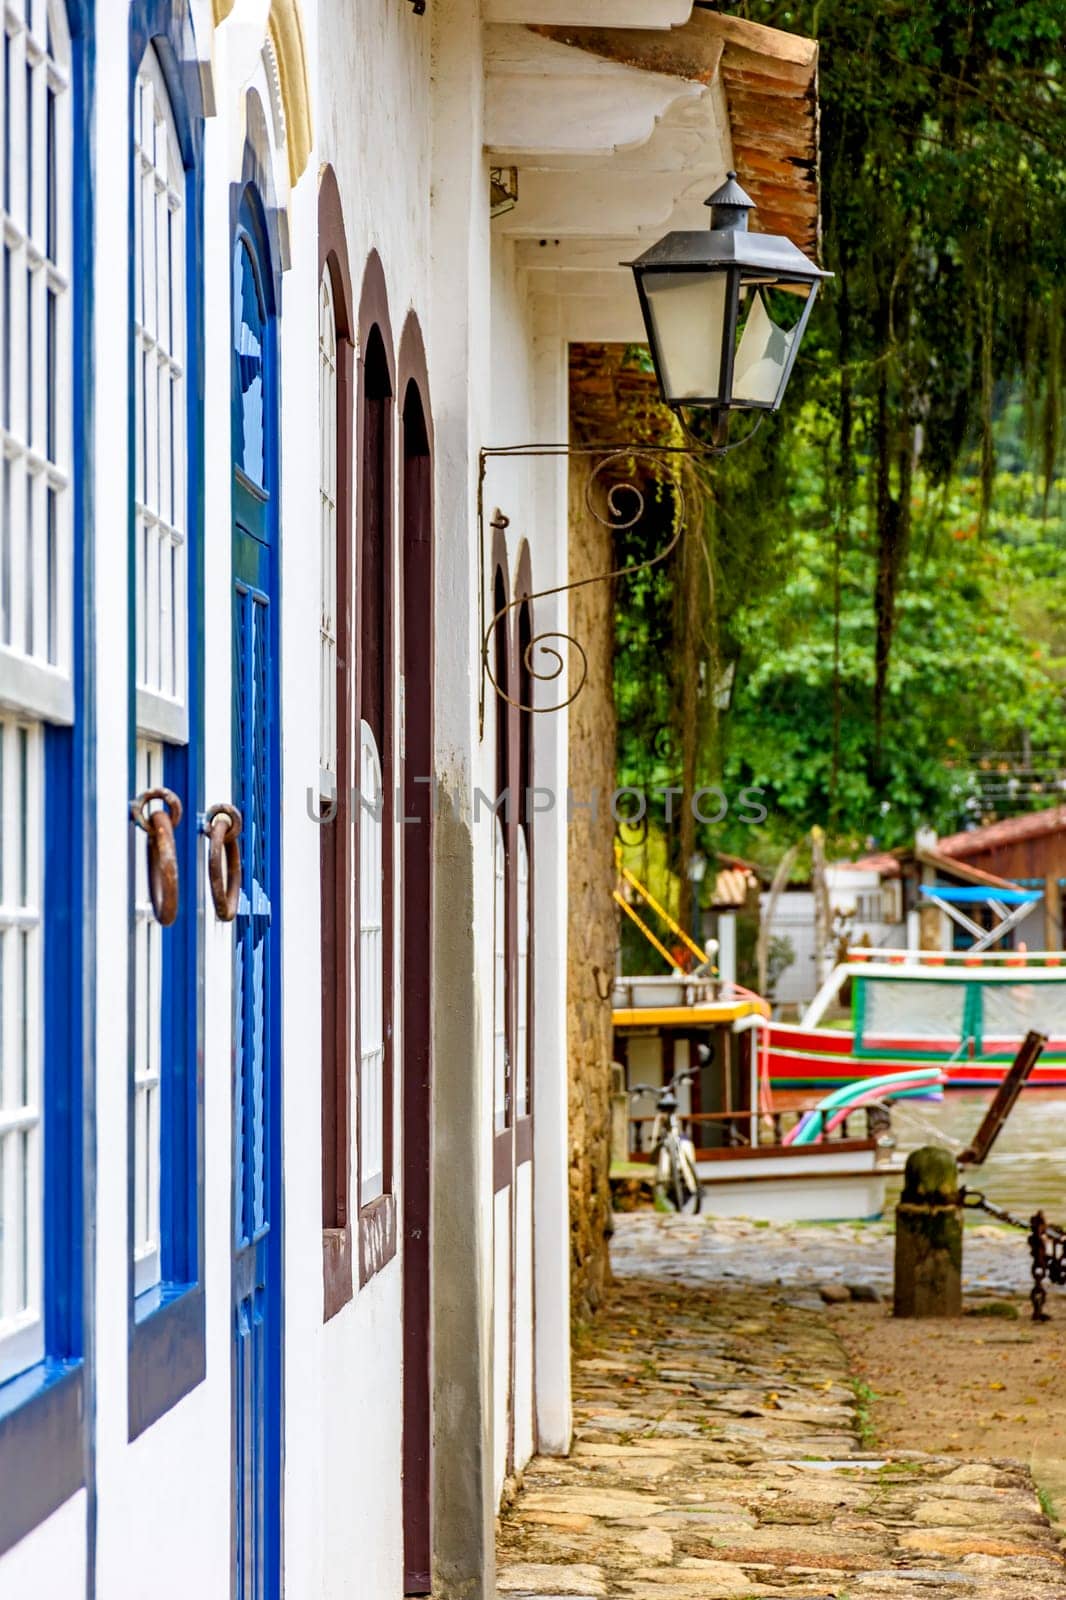 Colonial style house facades with old metal lantern and boats in the background in the historic town of Paraty, Rio de Janeiro, Brazil